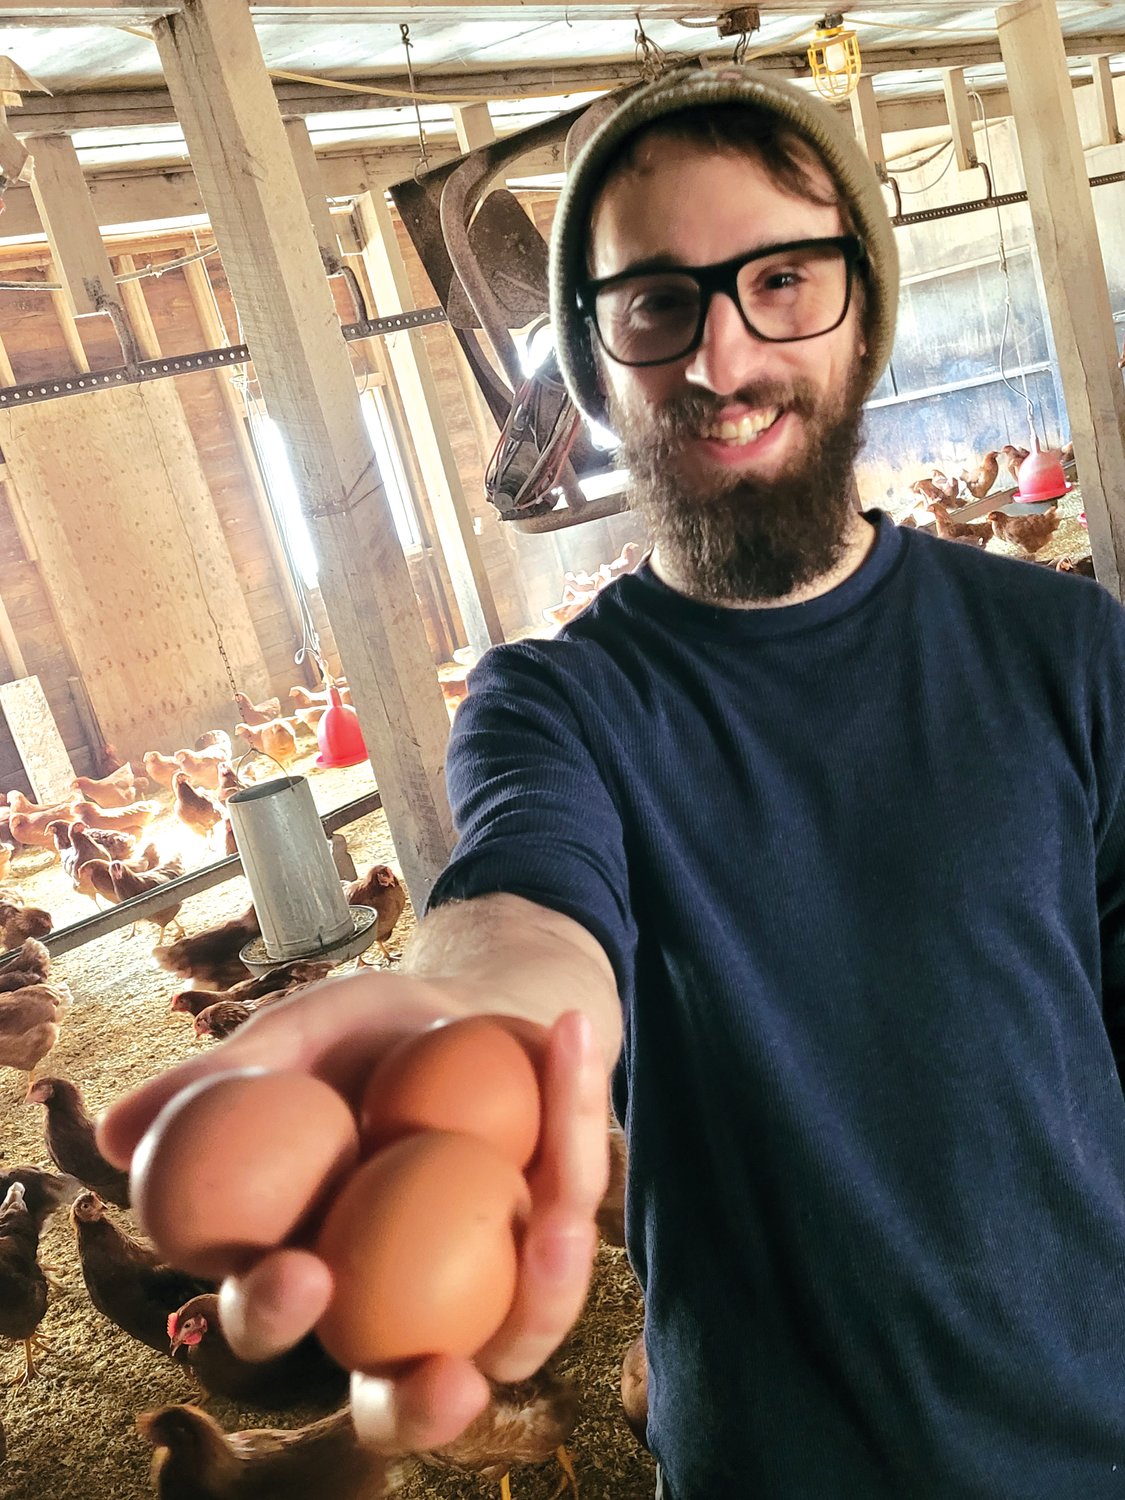 EGGING ON THE COMPETITION: Fourth-generation poultry farmer Adam Baffoni, of Baffoni Poultry Farm in Johnston, holds three fresh eggs laid by a few of his nearly 8,000 egg-laying Rhode Island Red hens. (Sun Rise photos by Rory Schuler)